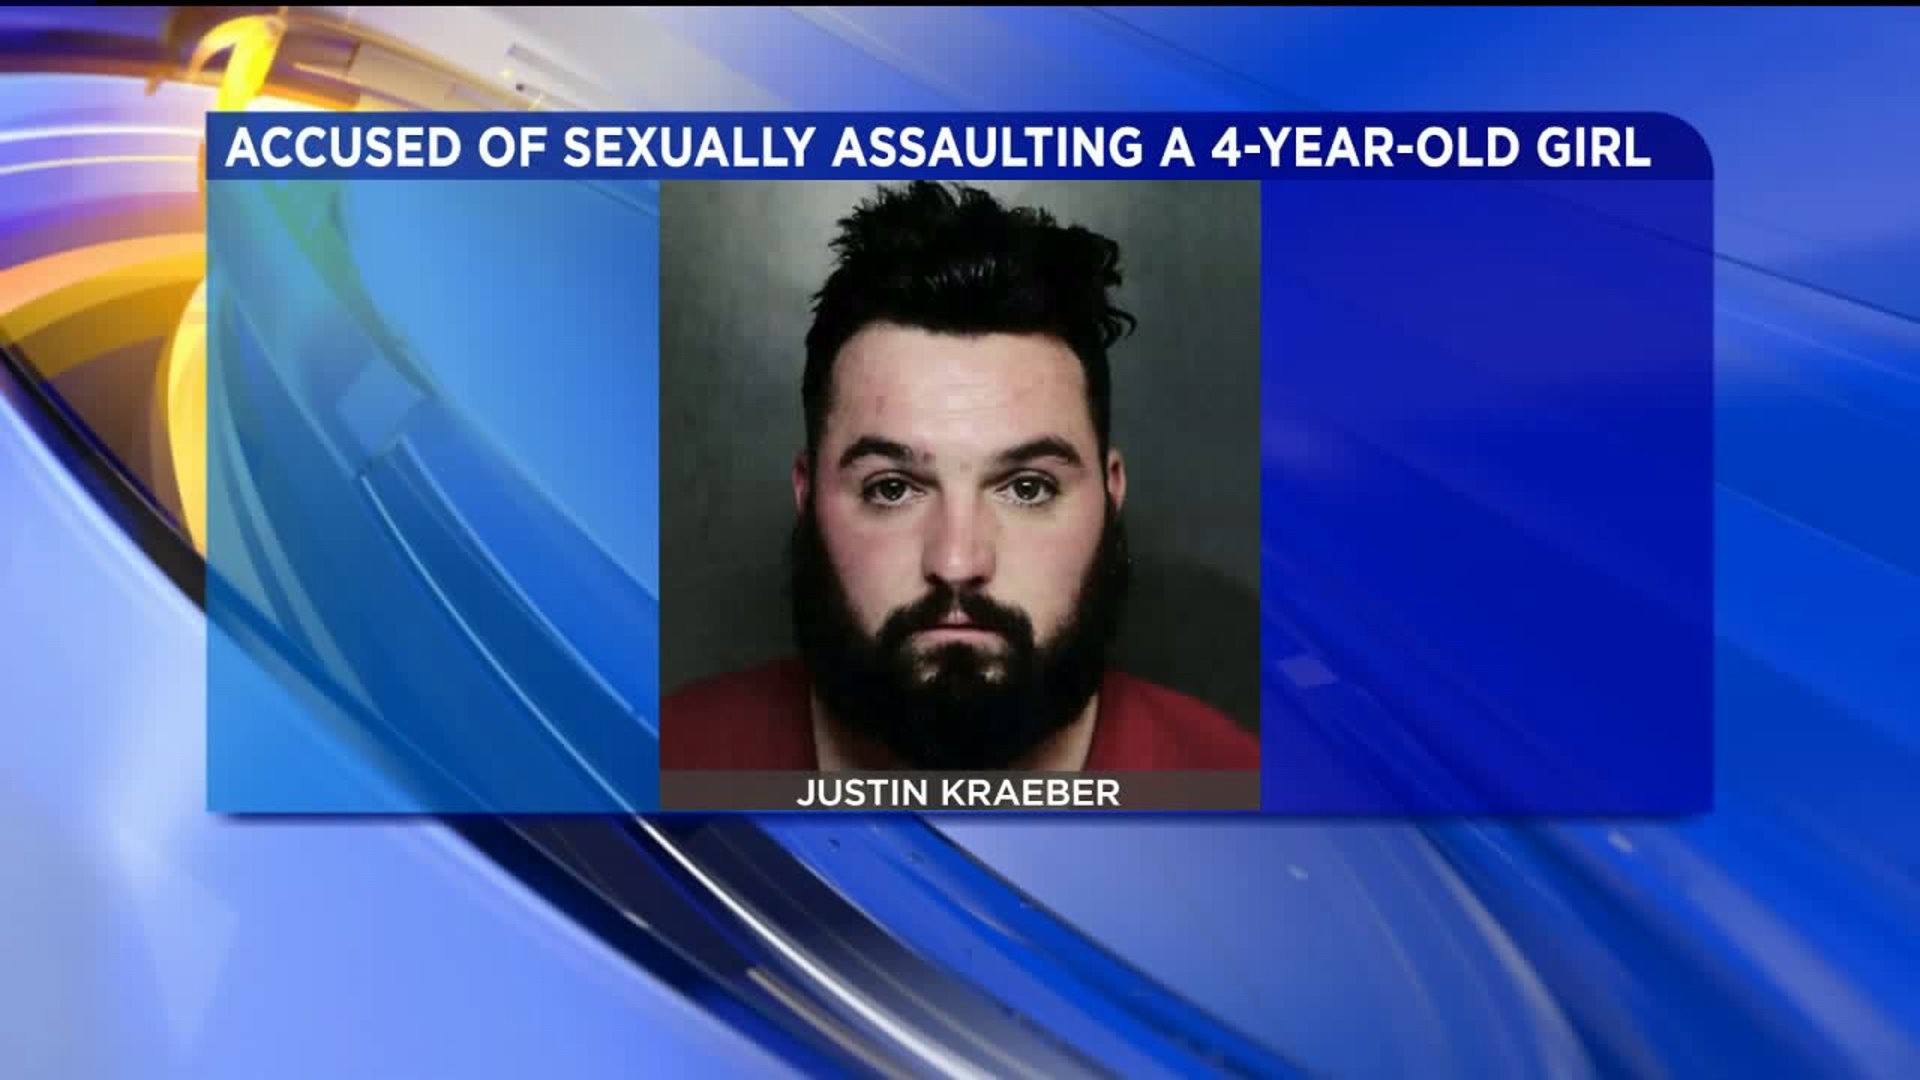 Man Locked Up After Allegedly Sexually Assaulting a Child